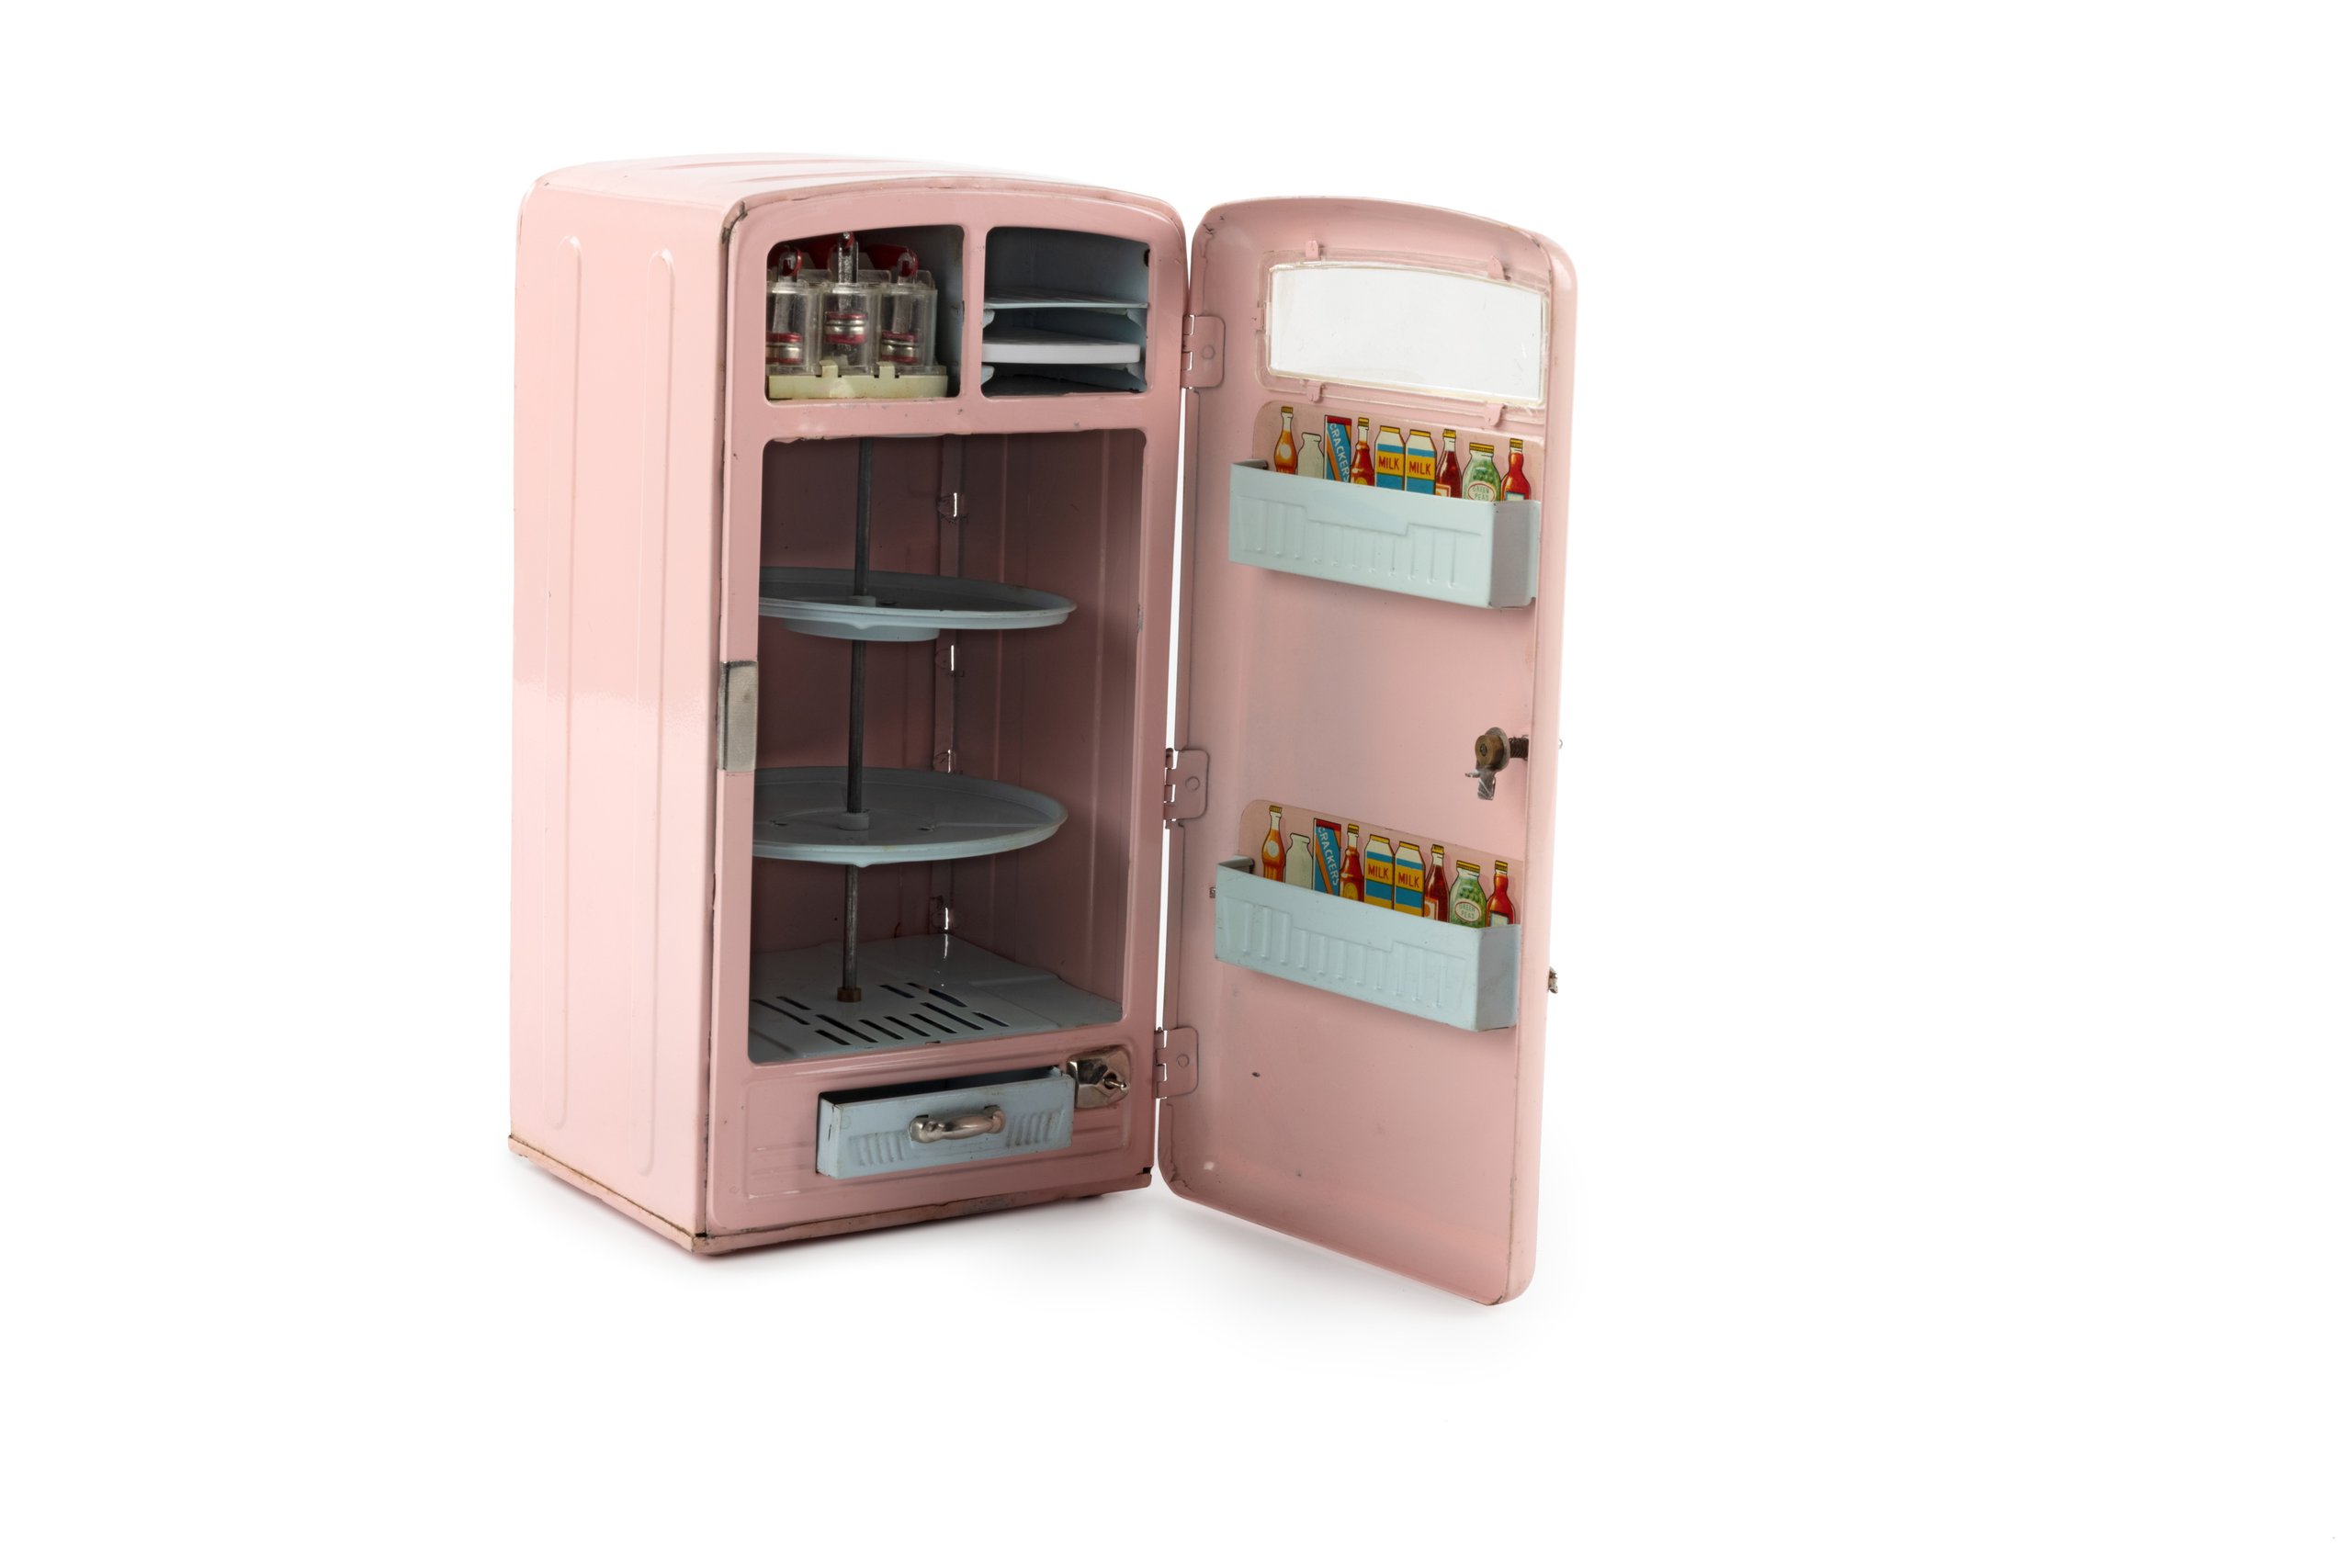 'Piston Action Refrigerator with revolving shelves' toy by Exelo